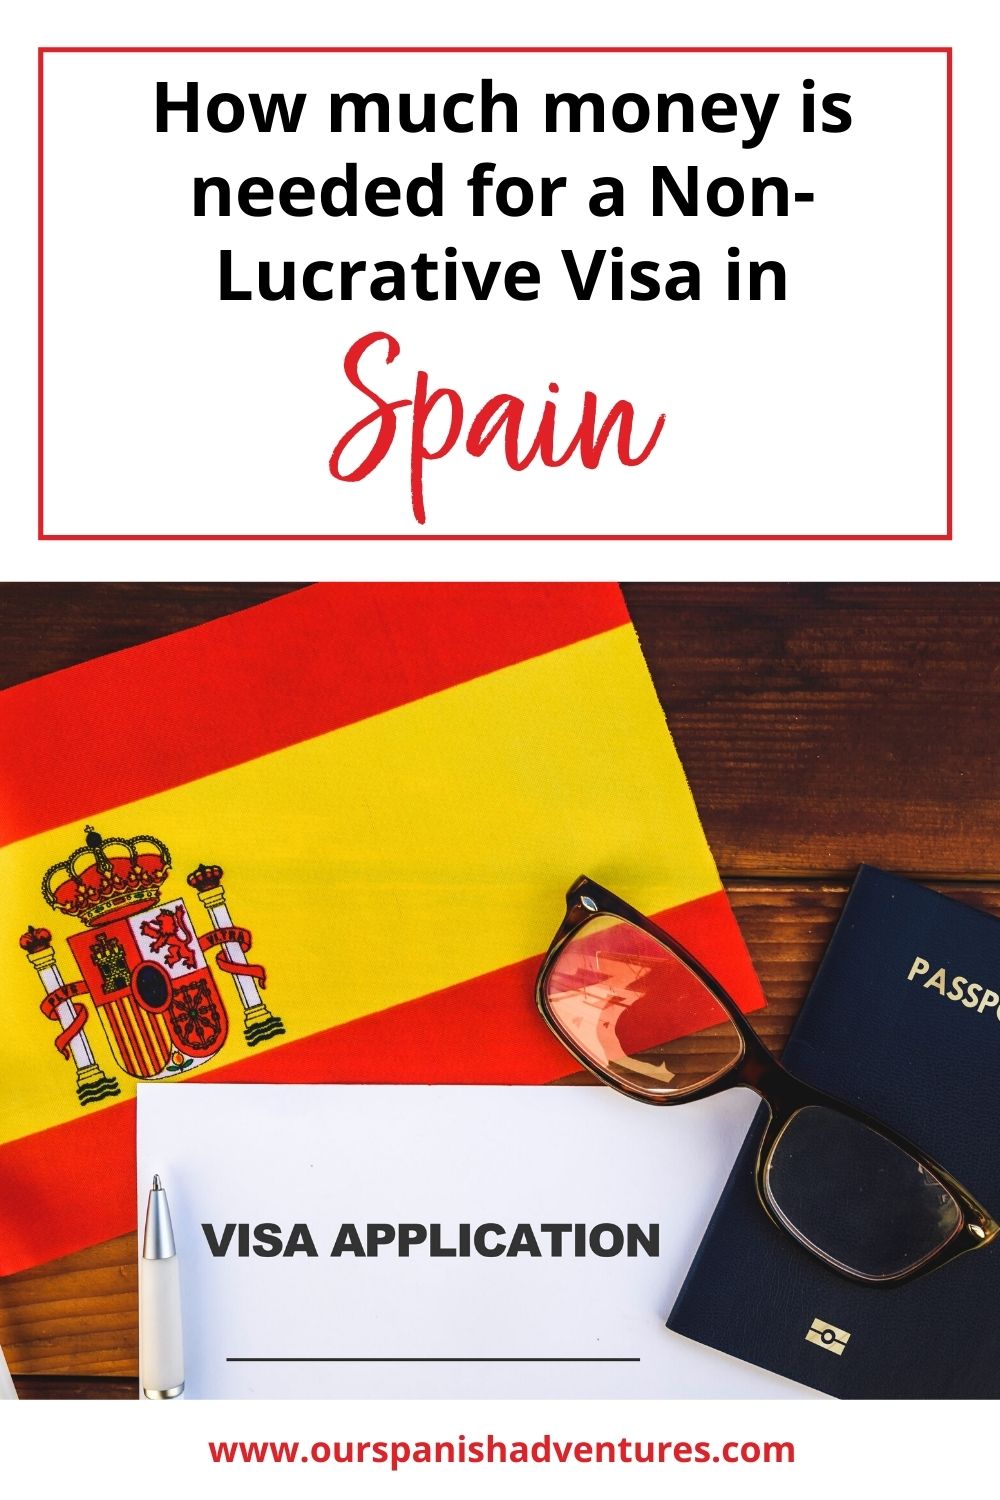 How much money is needed for a non-lucrative visa in Spain? | Our Spanish Adventures